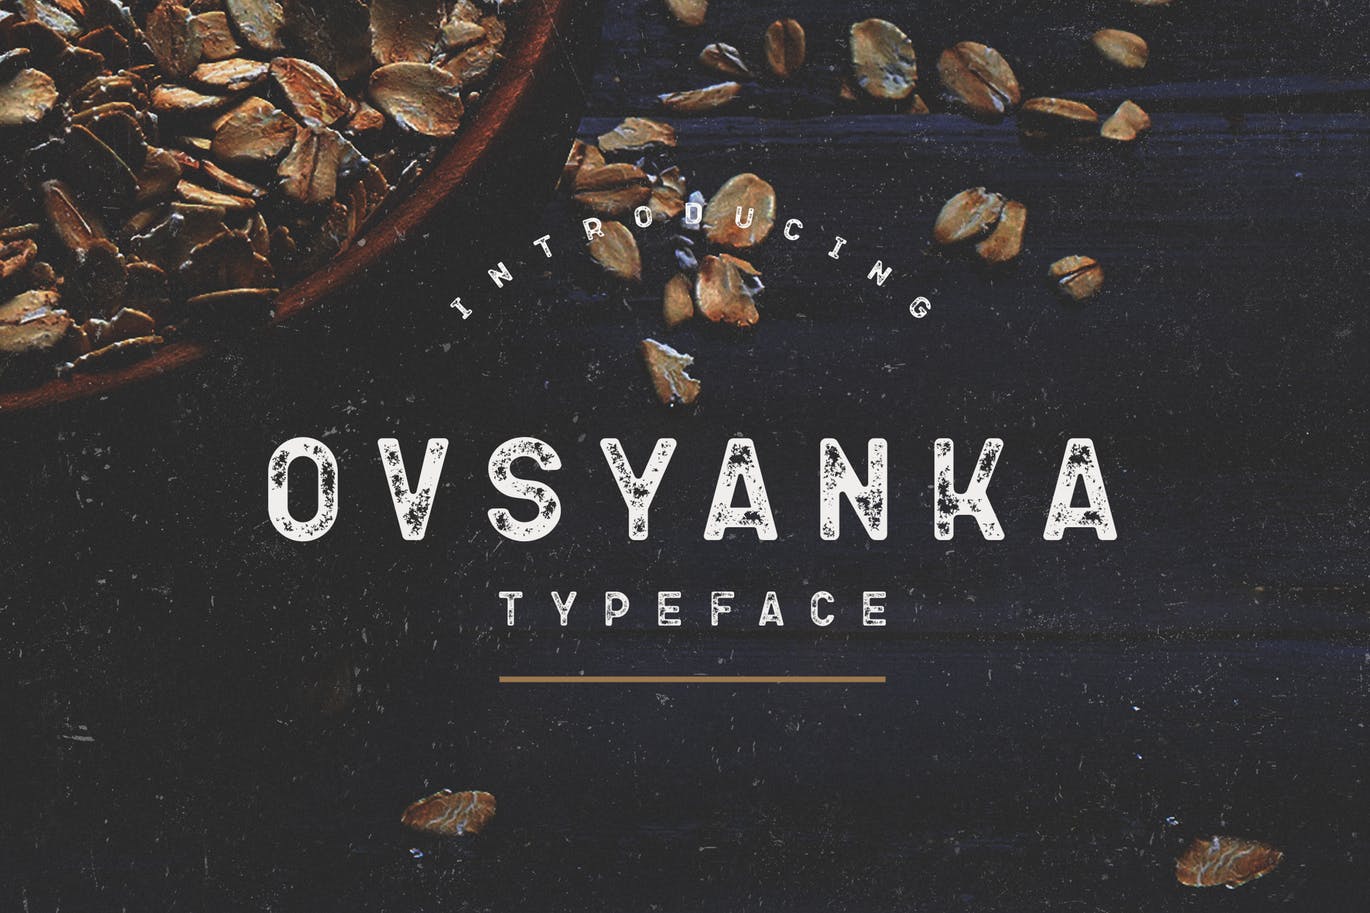 A grunge style coffee font